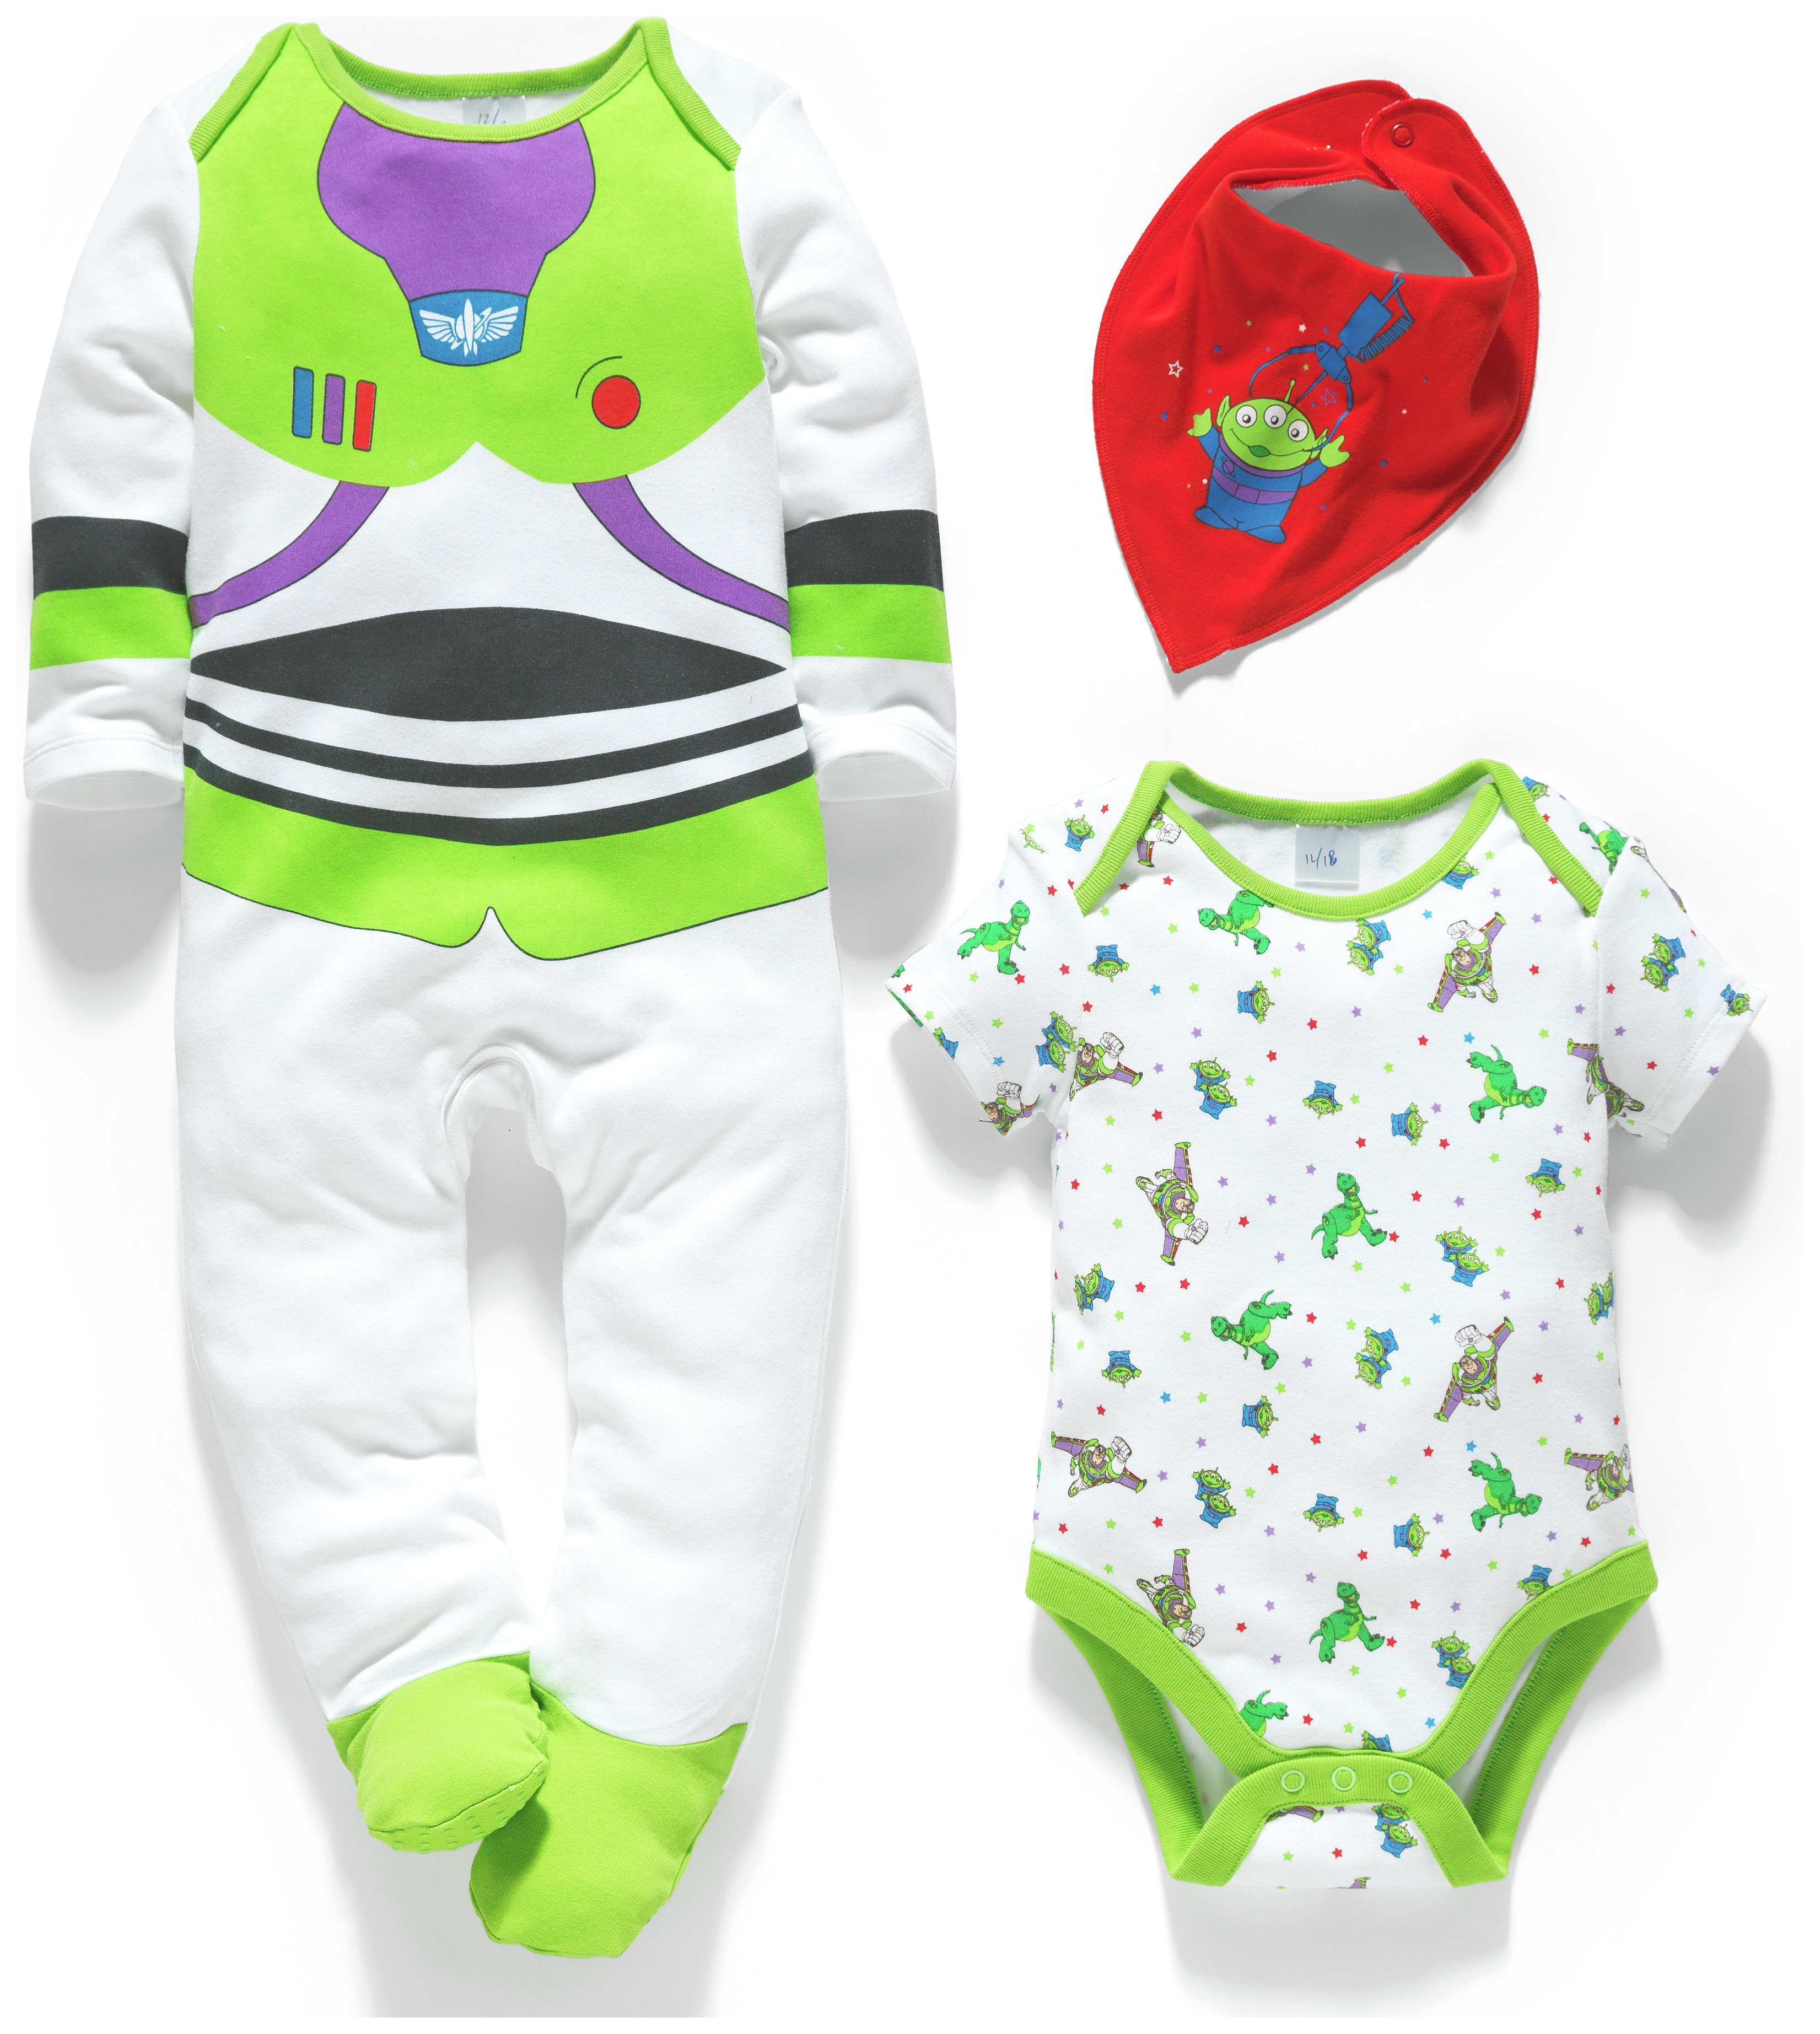 Disney Toy Story 3 Piece Gift Set - 0-3 Months